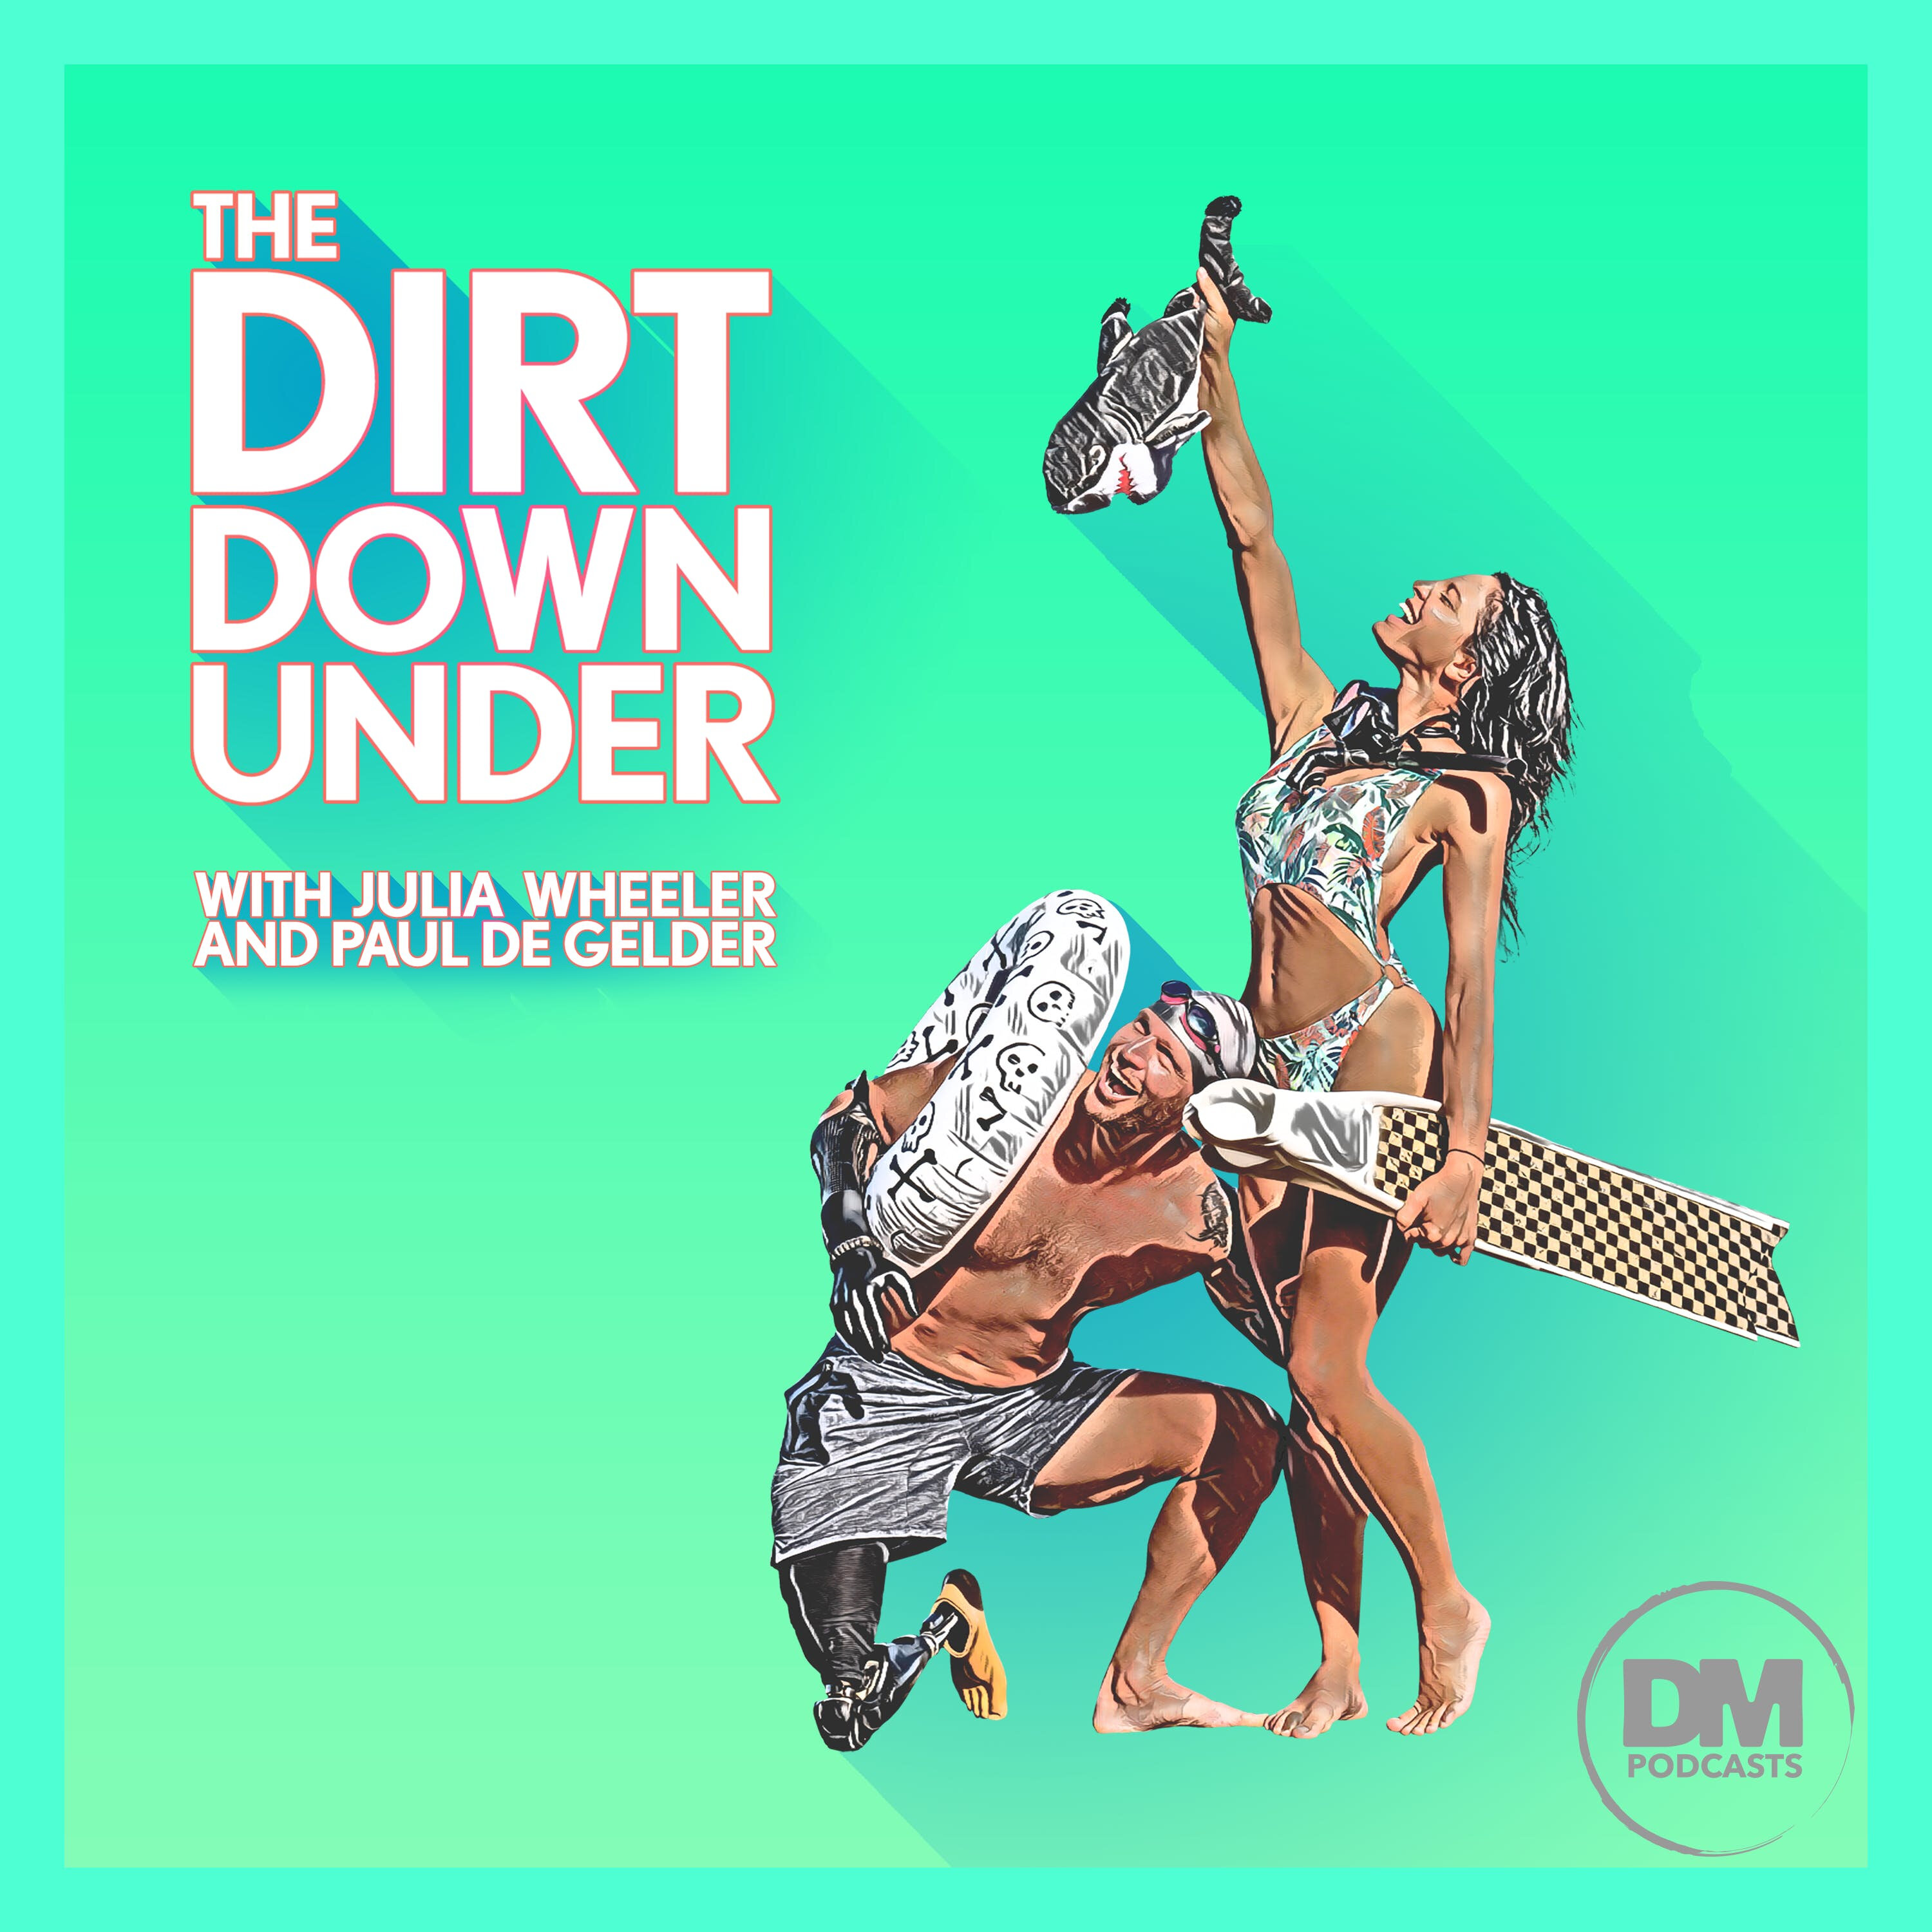 The Dirt Down Under